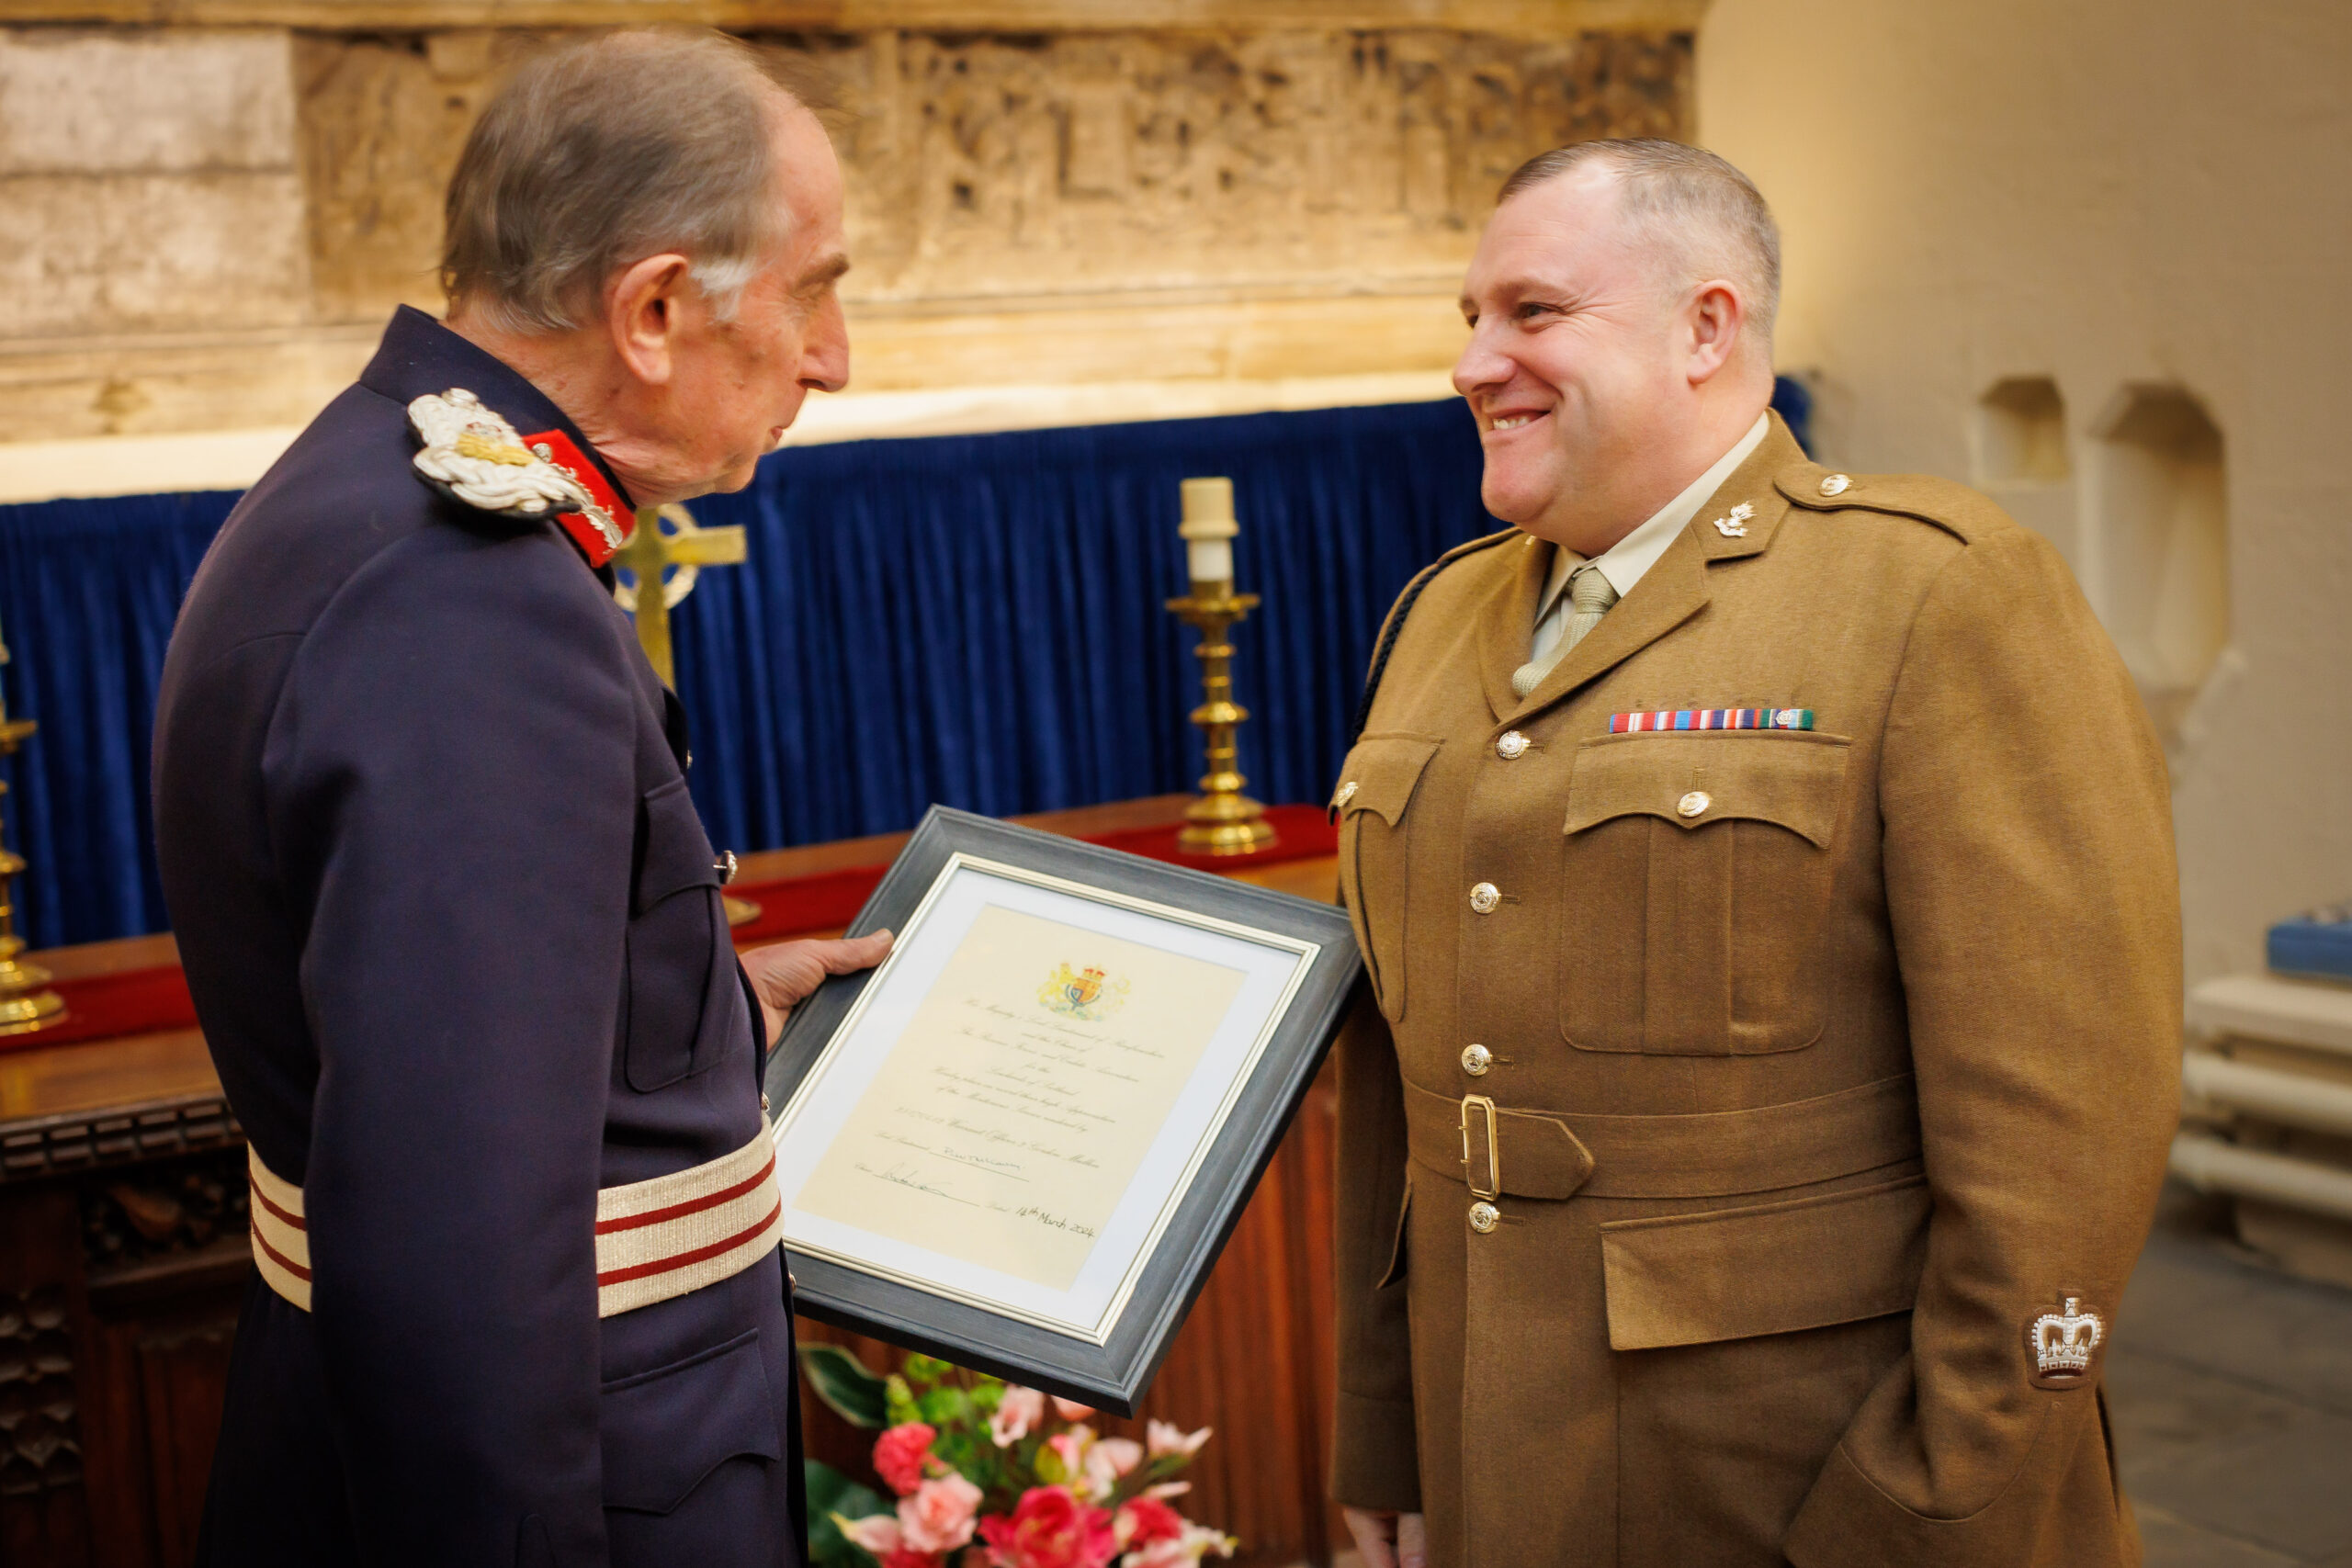 Colonel Peter McCarthy presents a framed Lord-Lieutenant's Certificate to 102 Field Squadron's Warrant Officer 2 Gordon Mullen